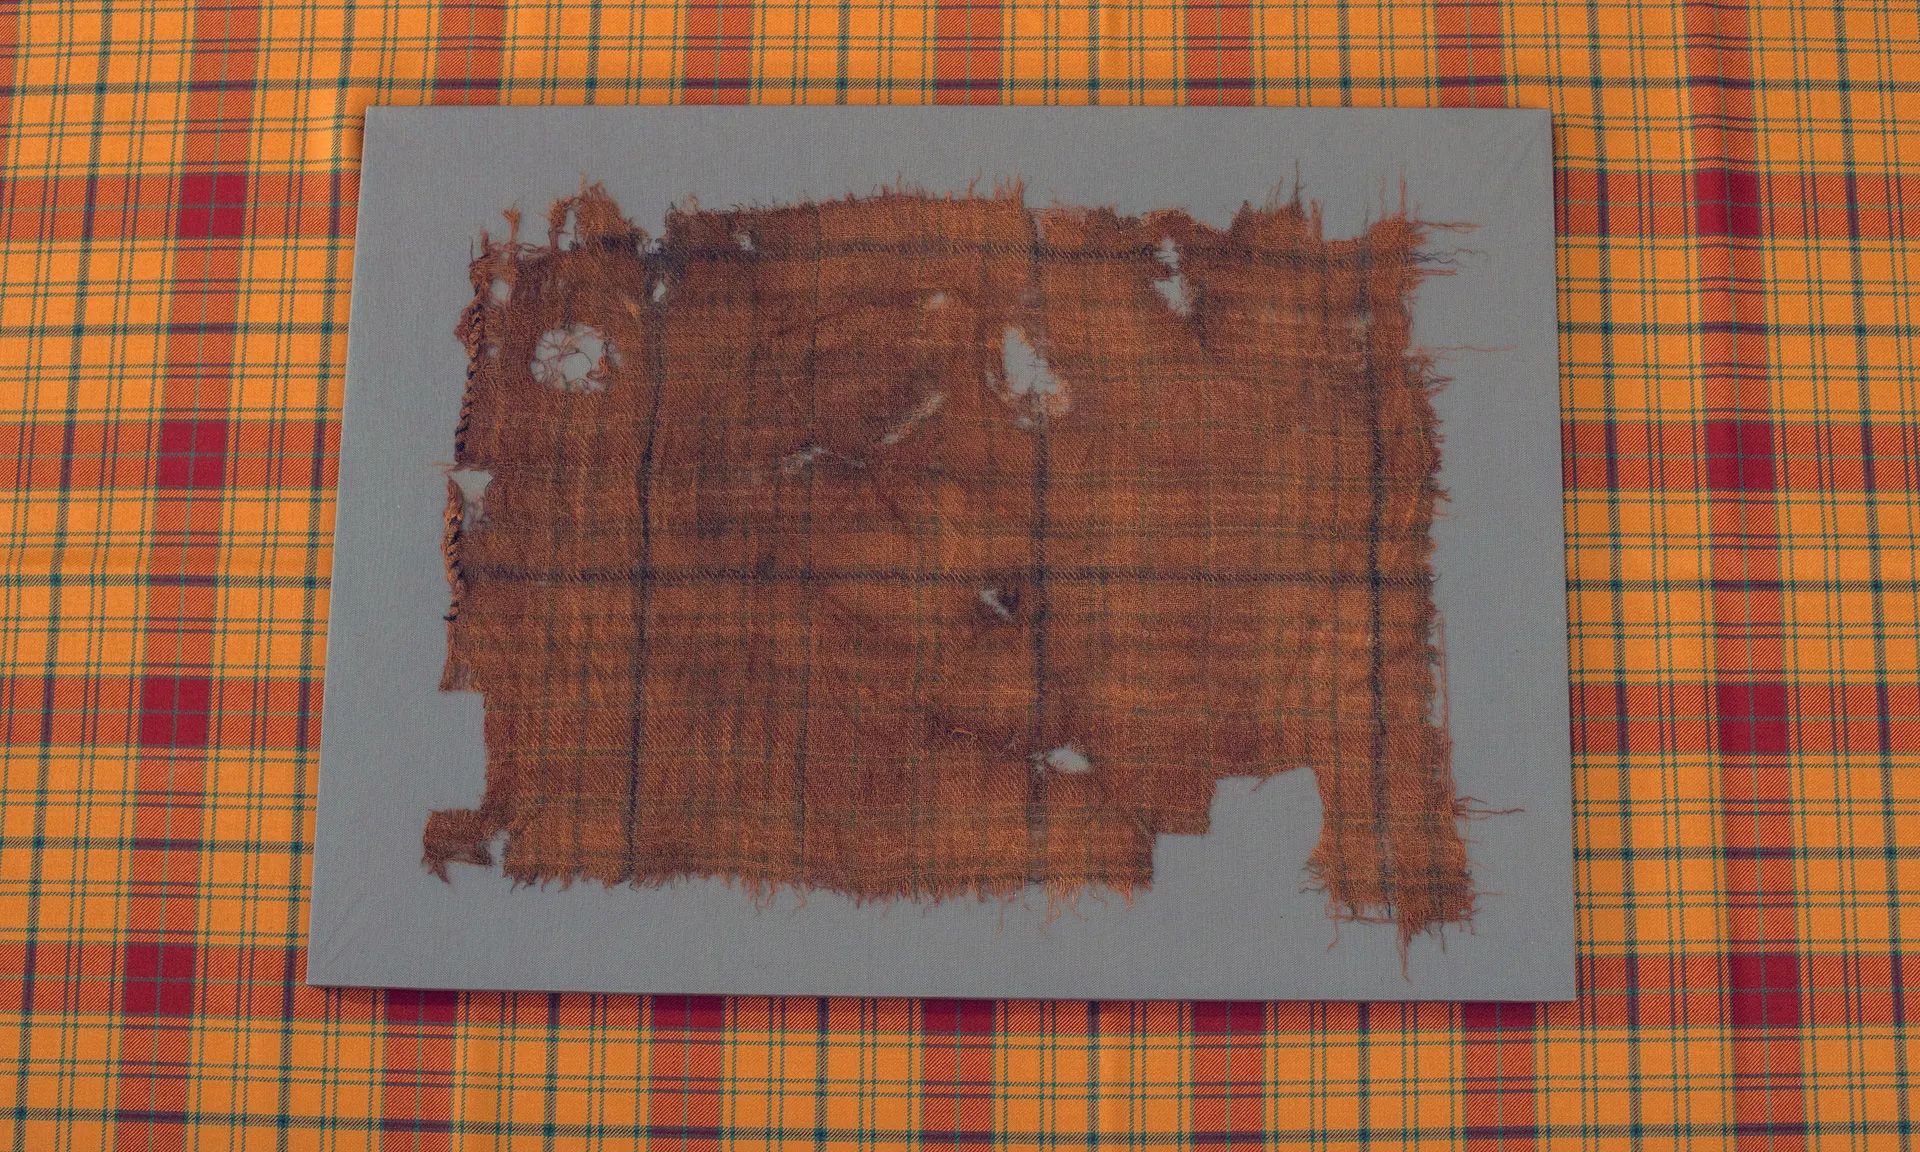 Scotland's oldest tartan, found in a peat bog, has been recreated and is  now available to buy